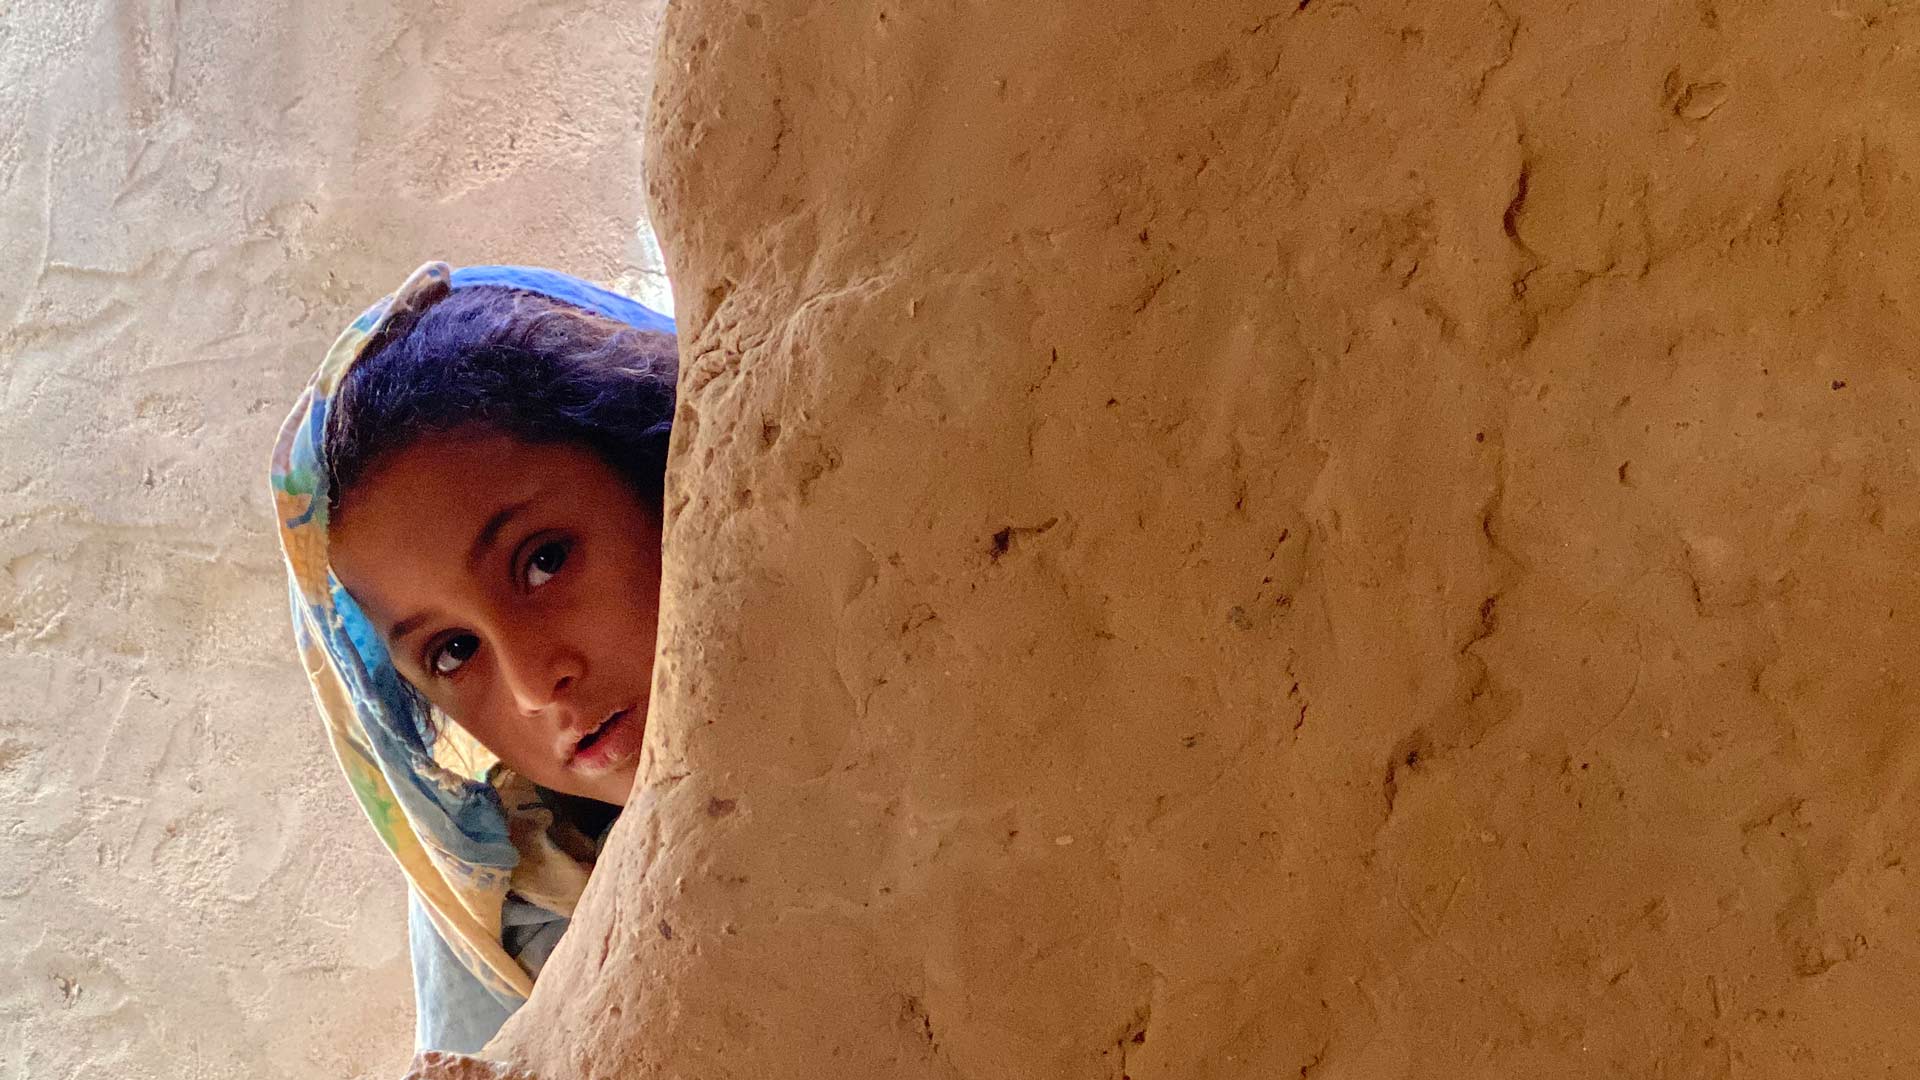 A young girl prepares for school from her mud home in one of 83 hosting sites for internally displaced Yemenis in Marib. March 2020, UNHCR/Marie-Joëlle Jean Charles